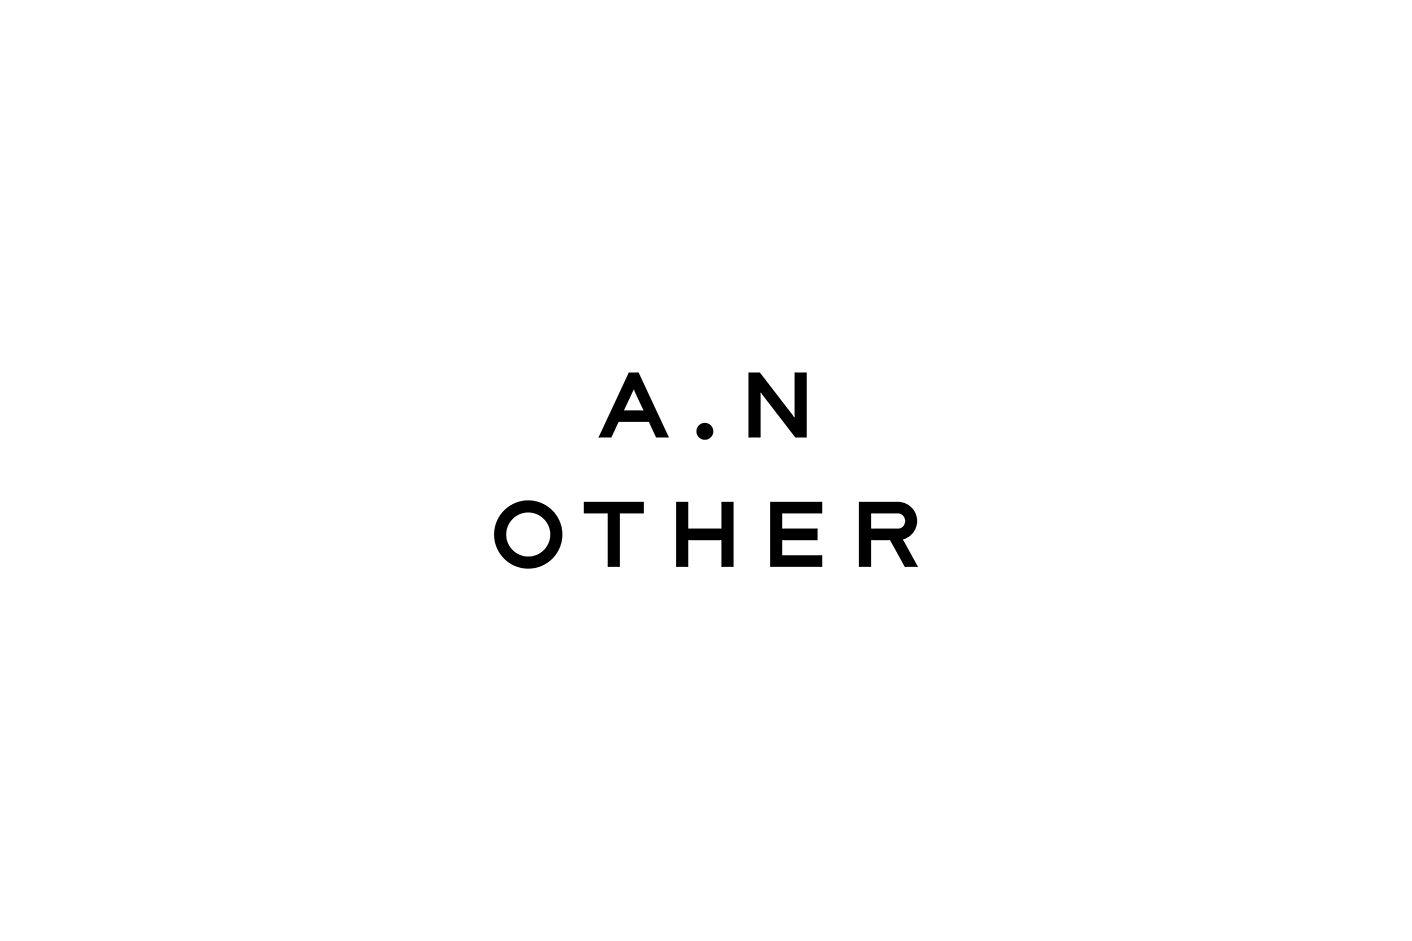 Other Logo - A.N. Other